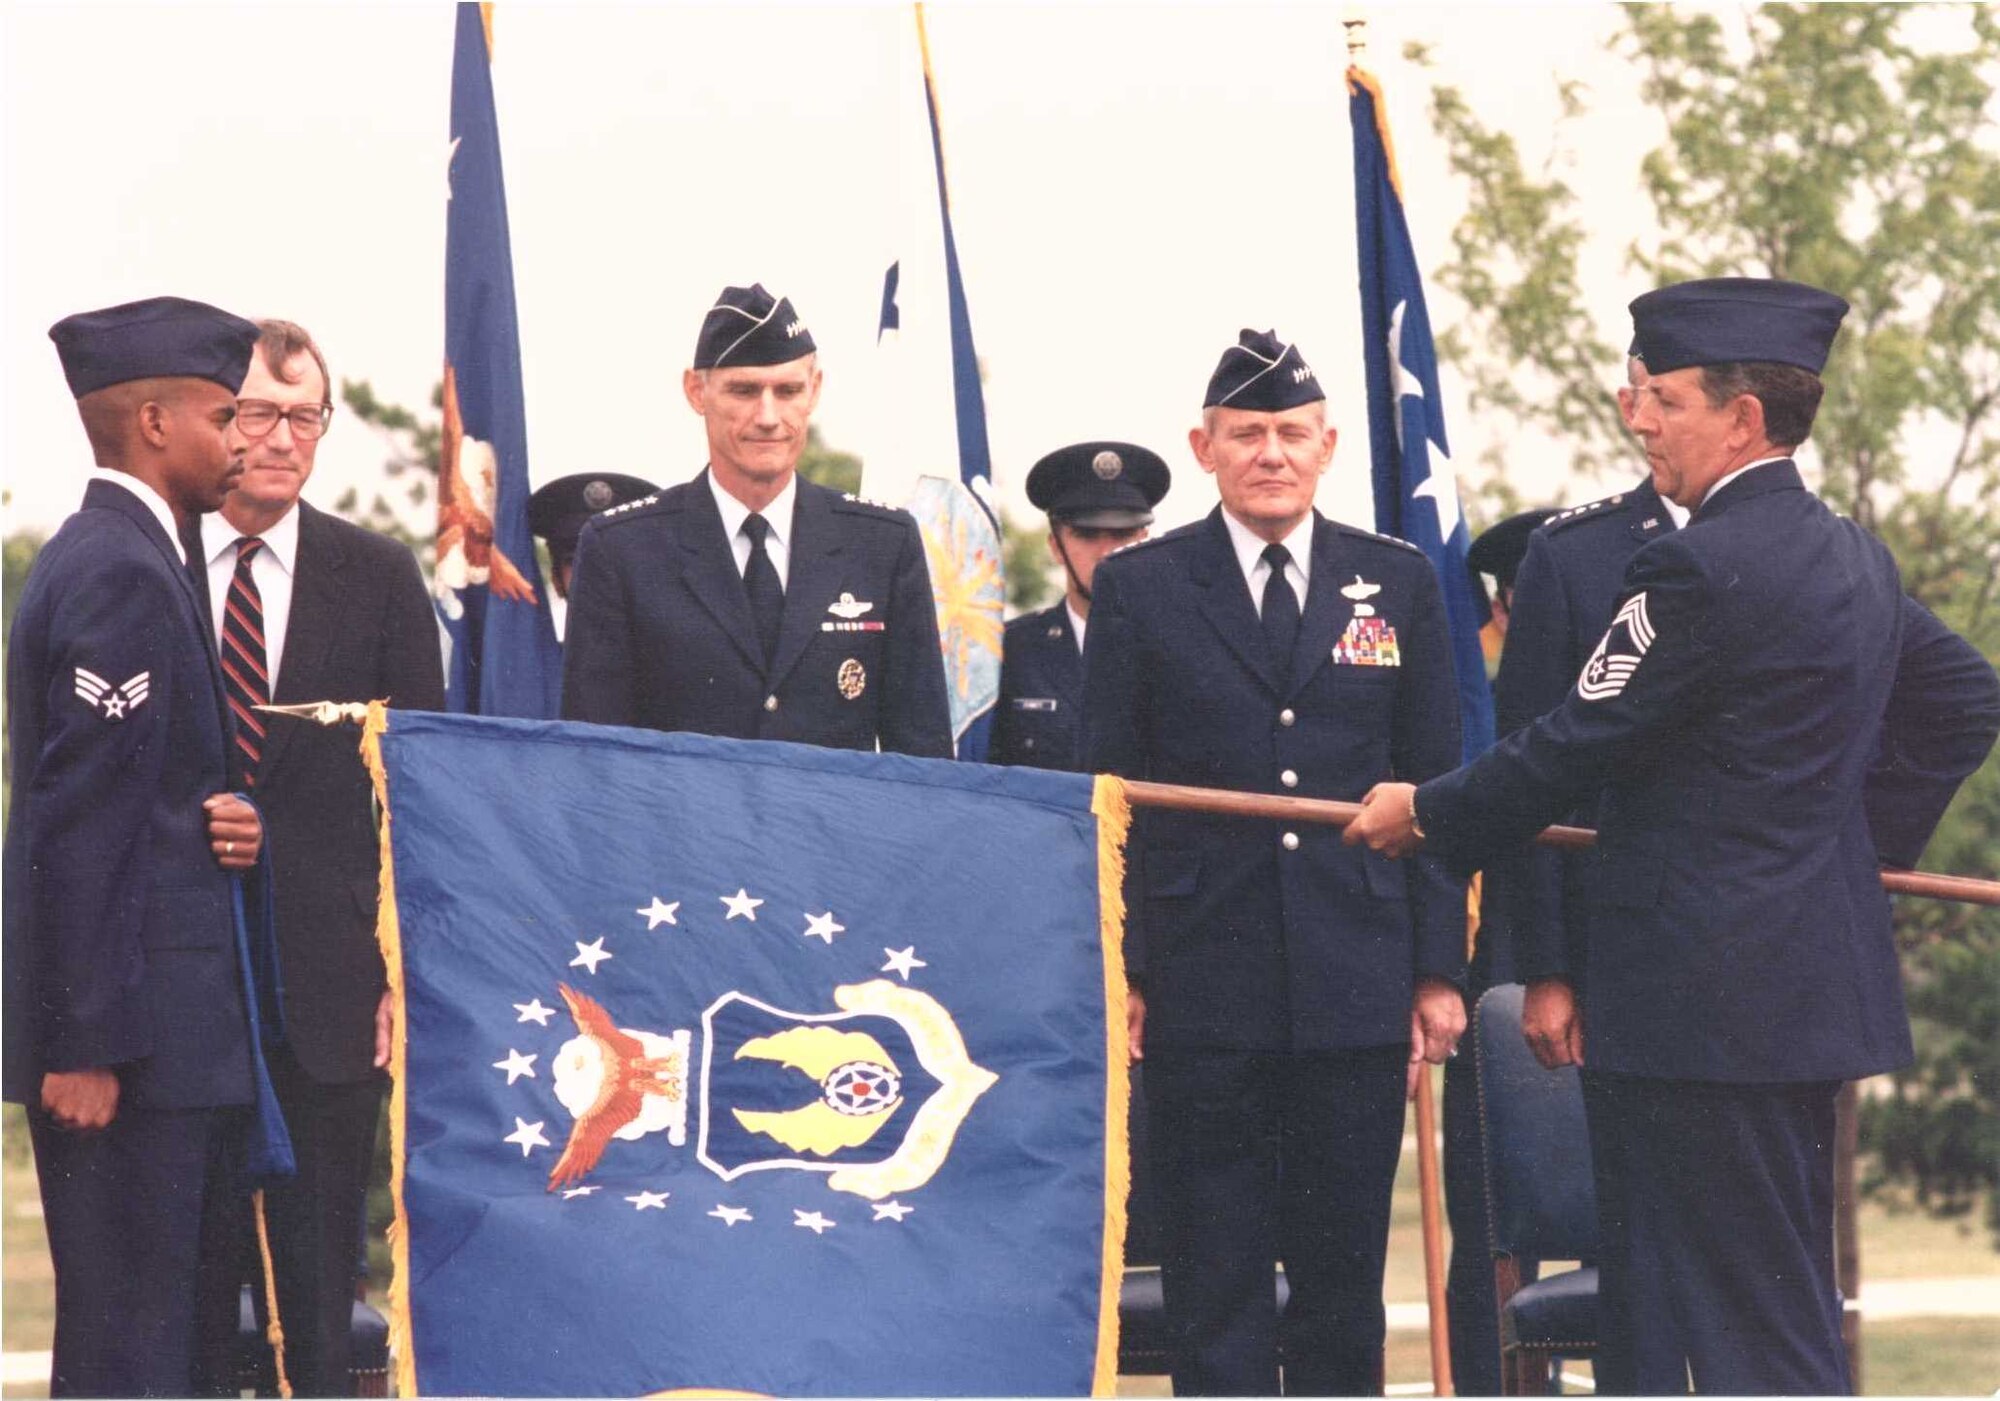 Secretary of the Air Force Dr. Donald B. Rice (from center left), Air Force Chief of Staff Gen. Merrill A. McPeak and Air Force Materiel Command Commander Gen. Ronald W. Yates stand as the AFMC flag is unfurled at the command's activation ceremony July 1, 1992. This year AFMC celebrates its 20th anniversary of providing expeditionary capabilities to the warfighter through development and transition of technology, acquisition management, test and evaluation, and sustainment of all Air Force weapon systems.  (File photo)